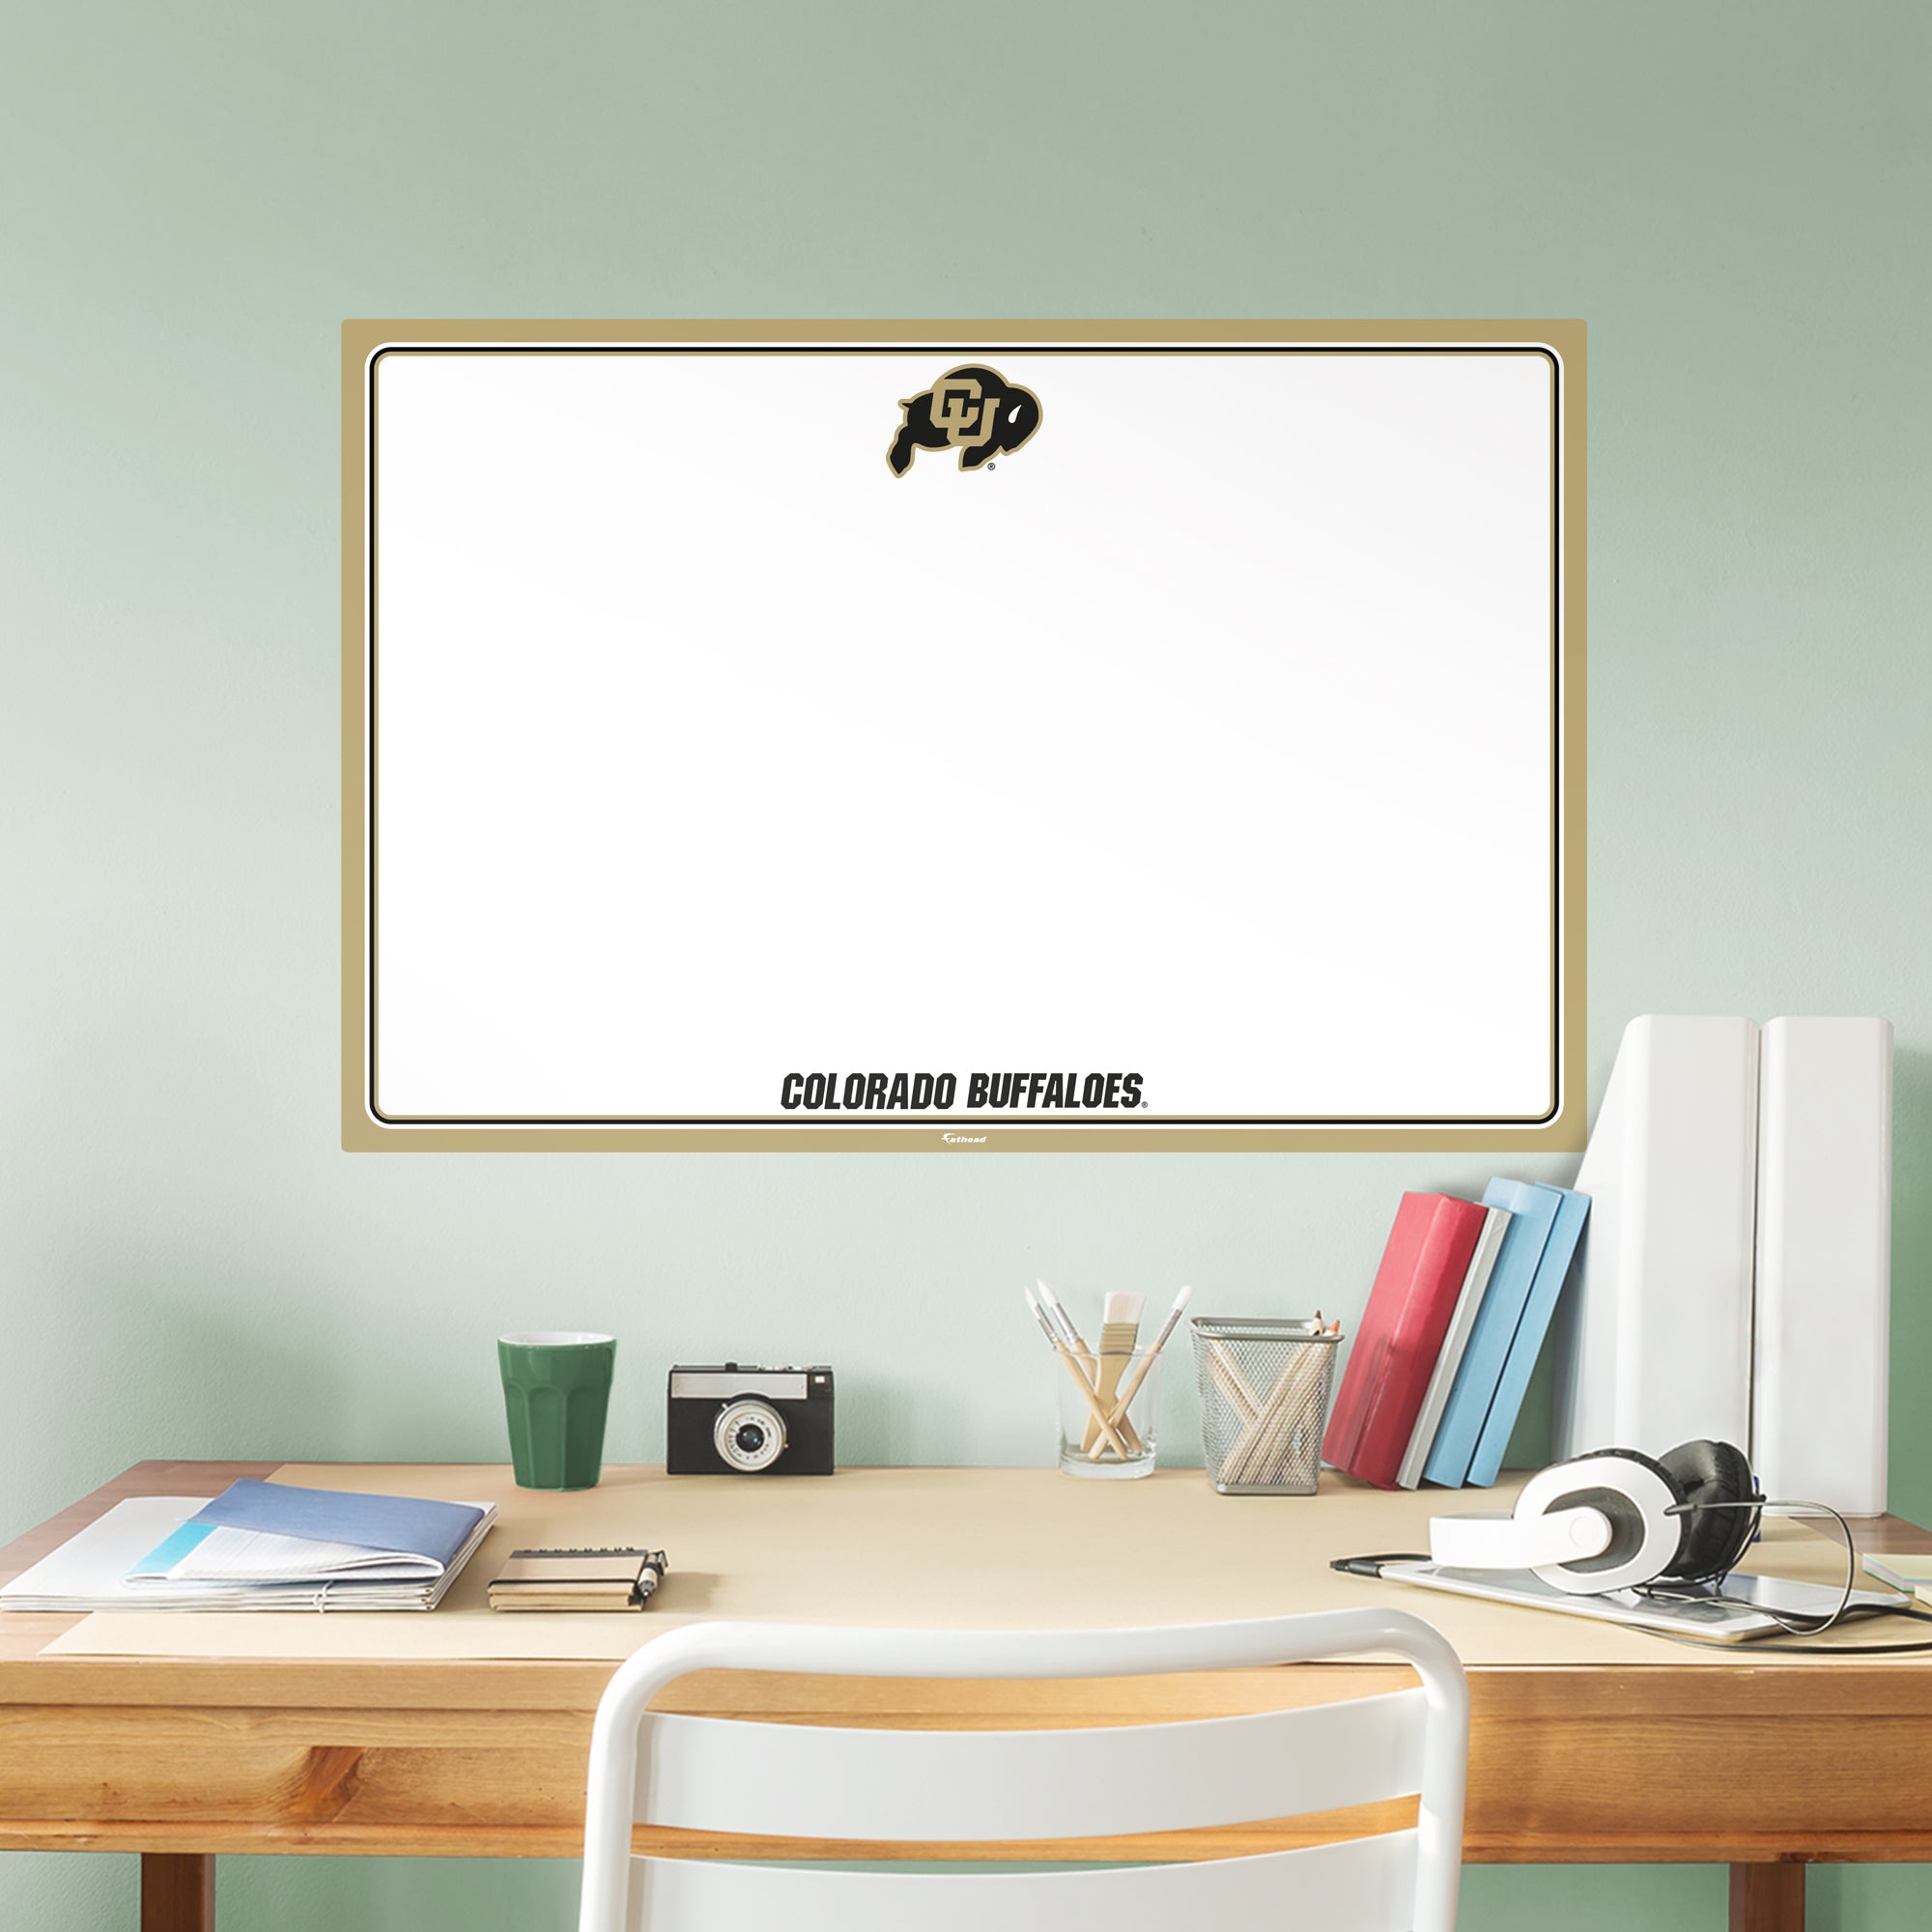 Colorado Buffaloes: Dry Erase Whiteboard - X-Large Officially Licensed NCAA Removable Wall Decal XL by Fathead | Vinyl